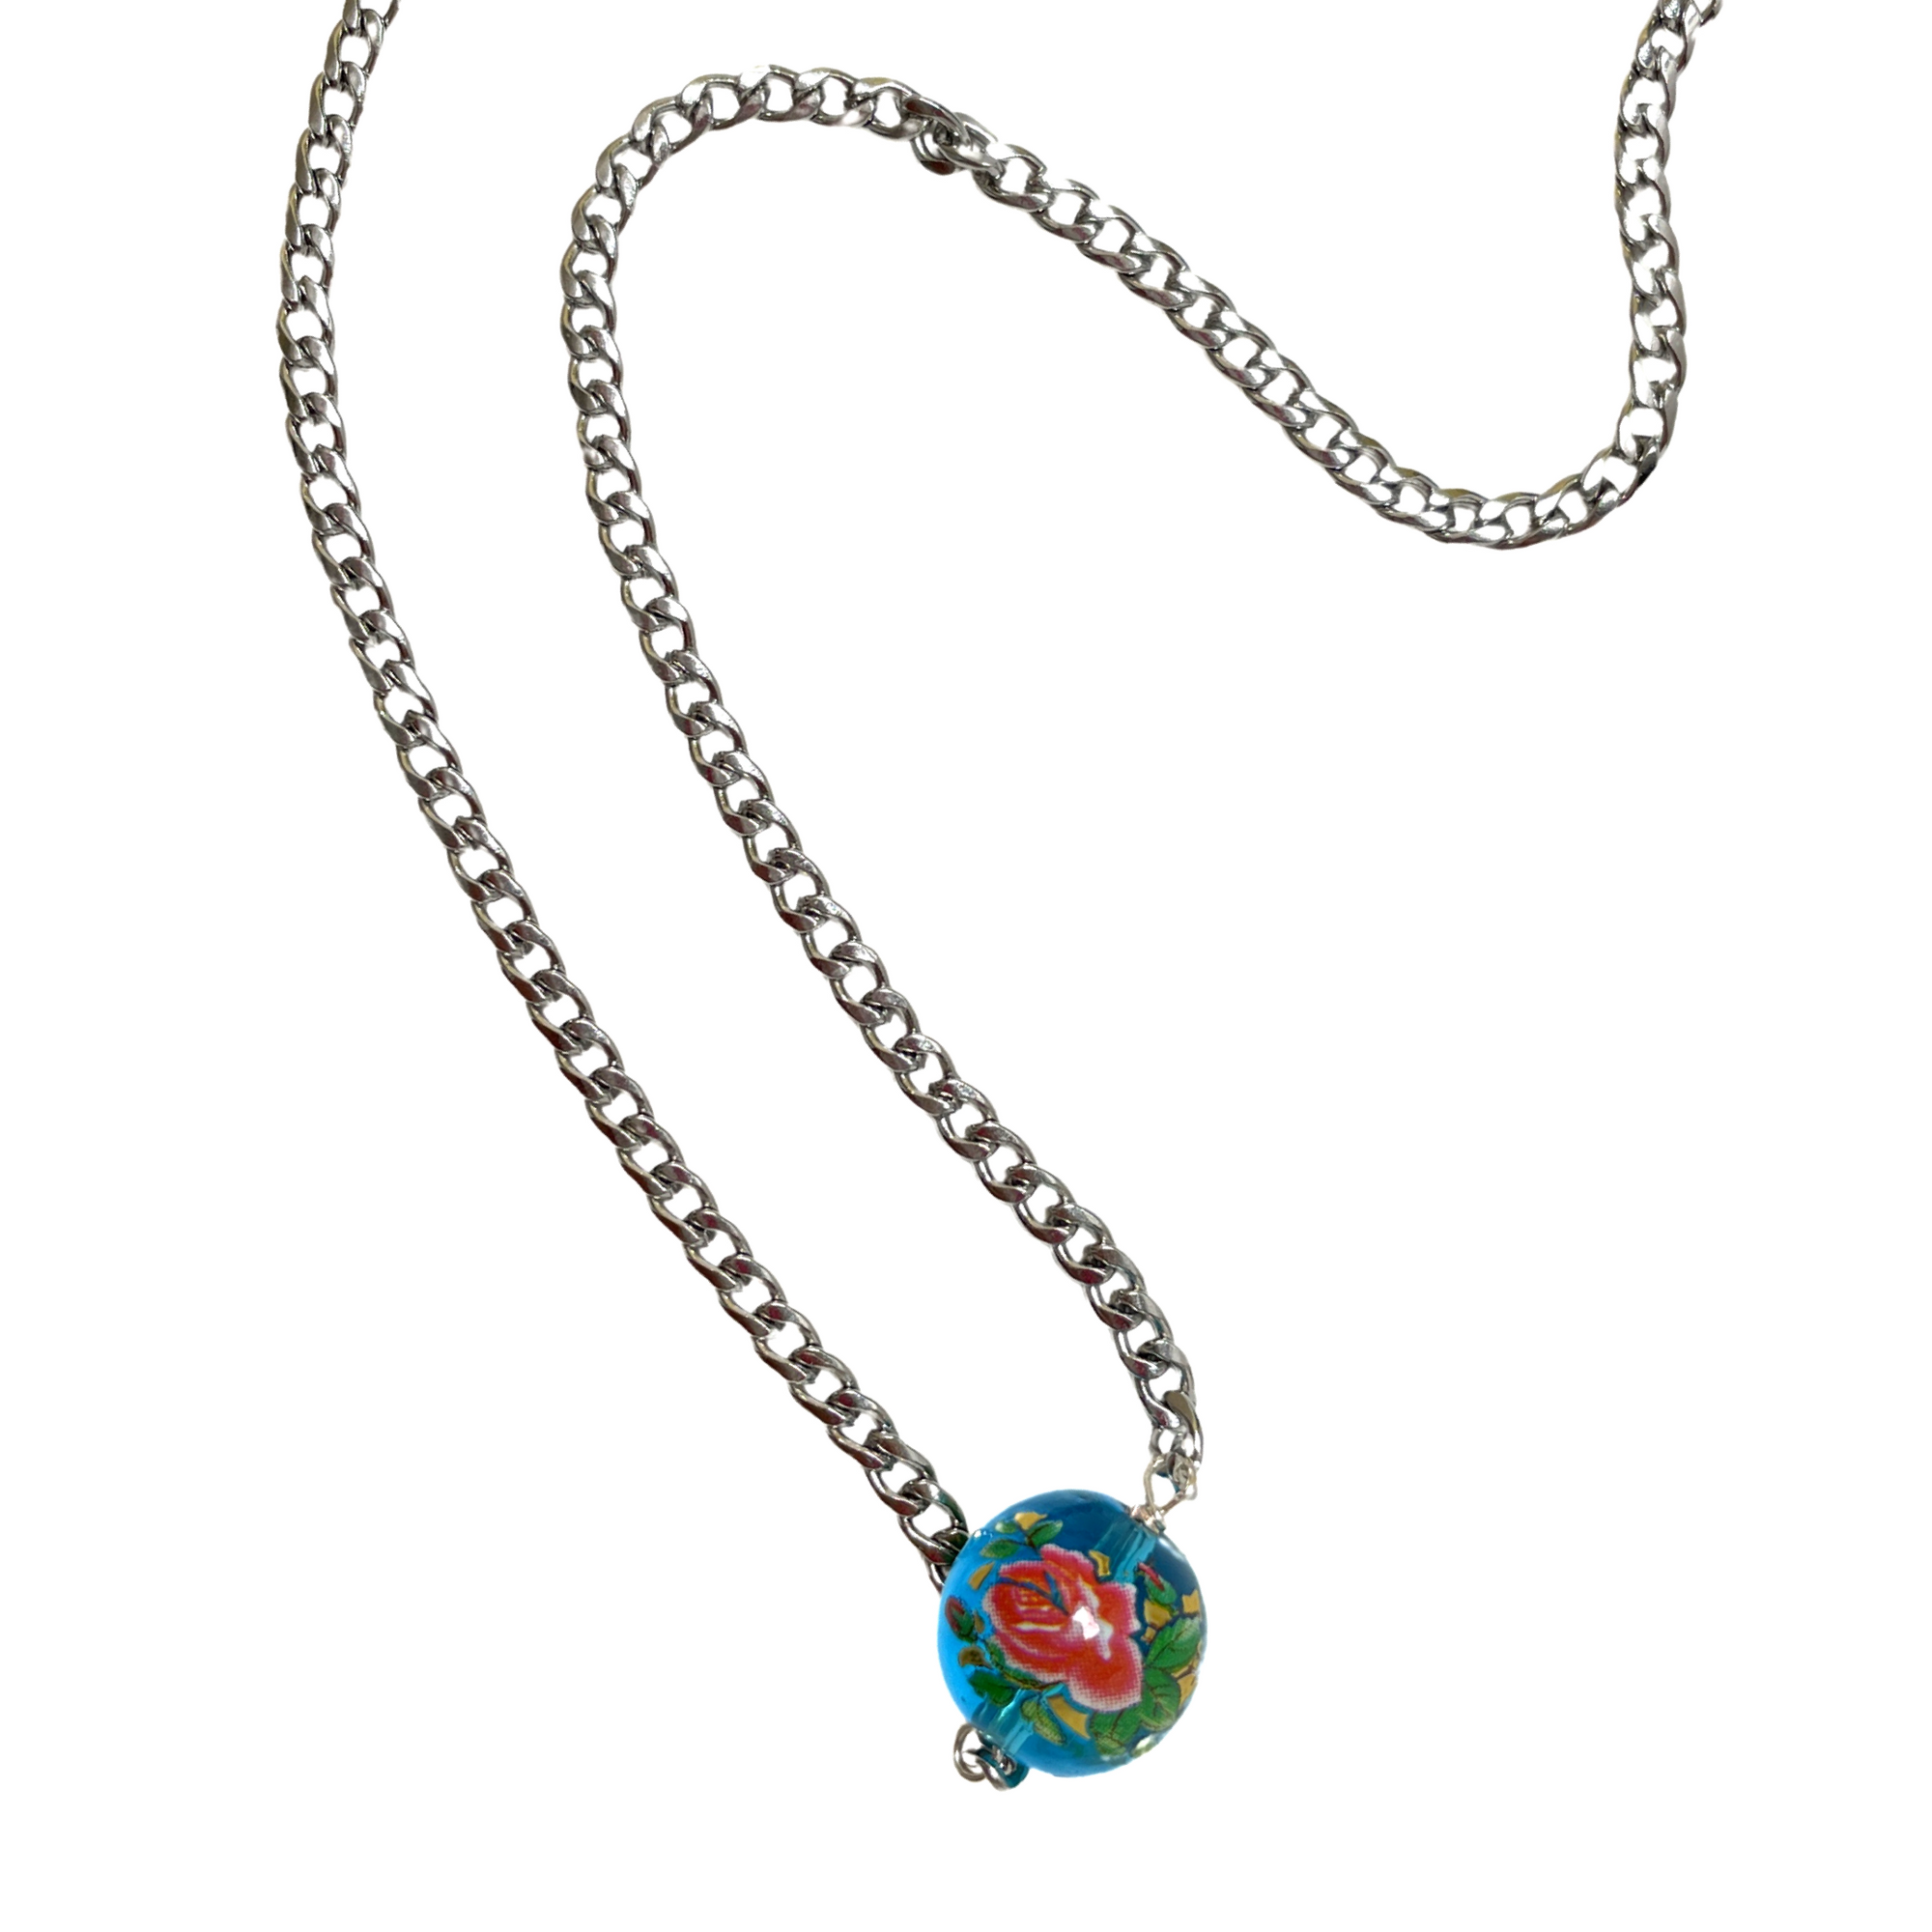 Jack and Jill Necklace Necklaces Cerese D, Inc.   